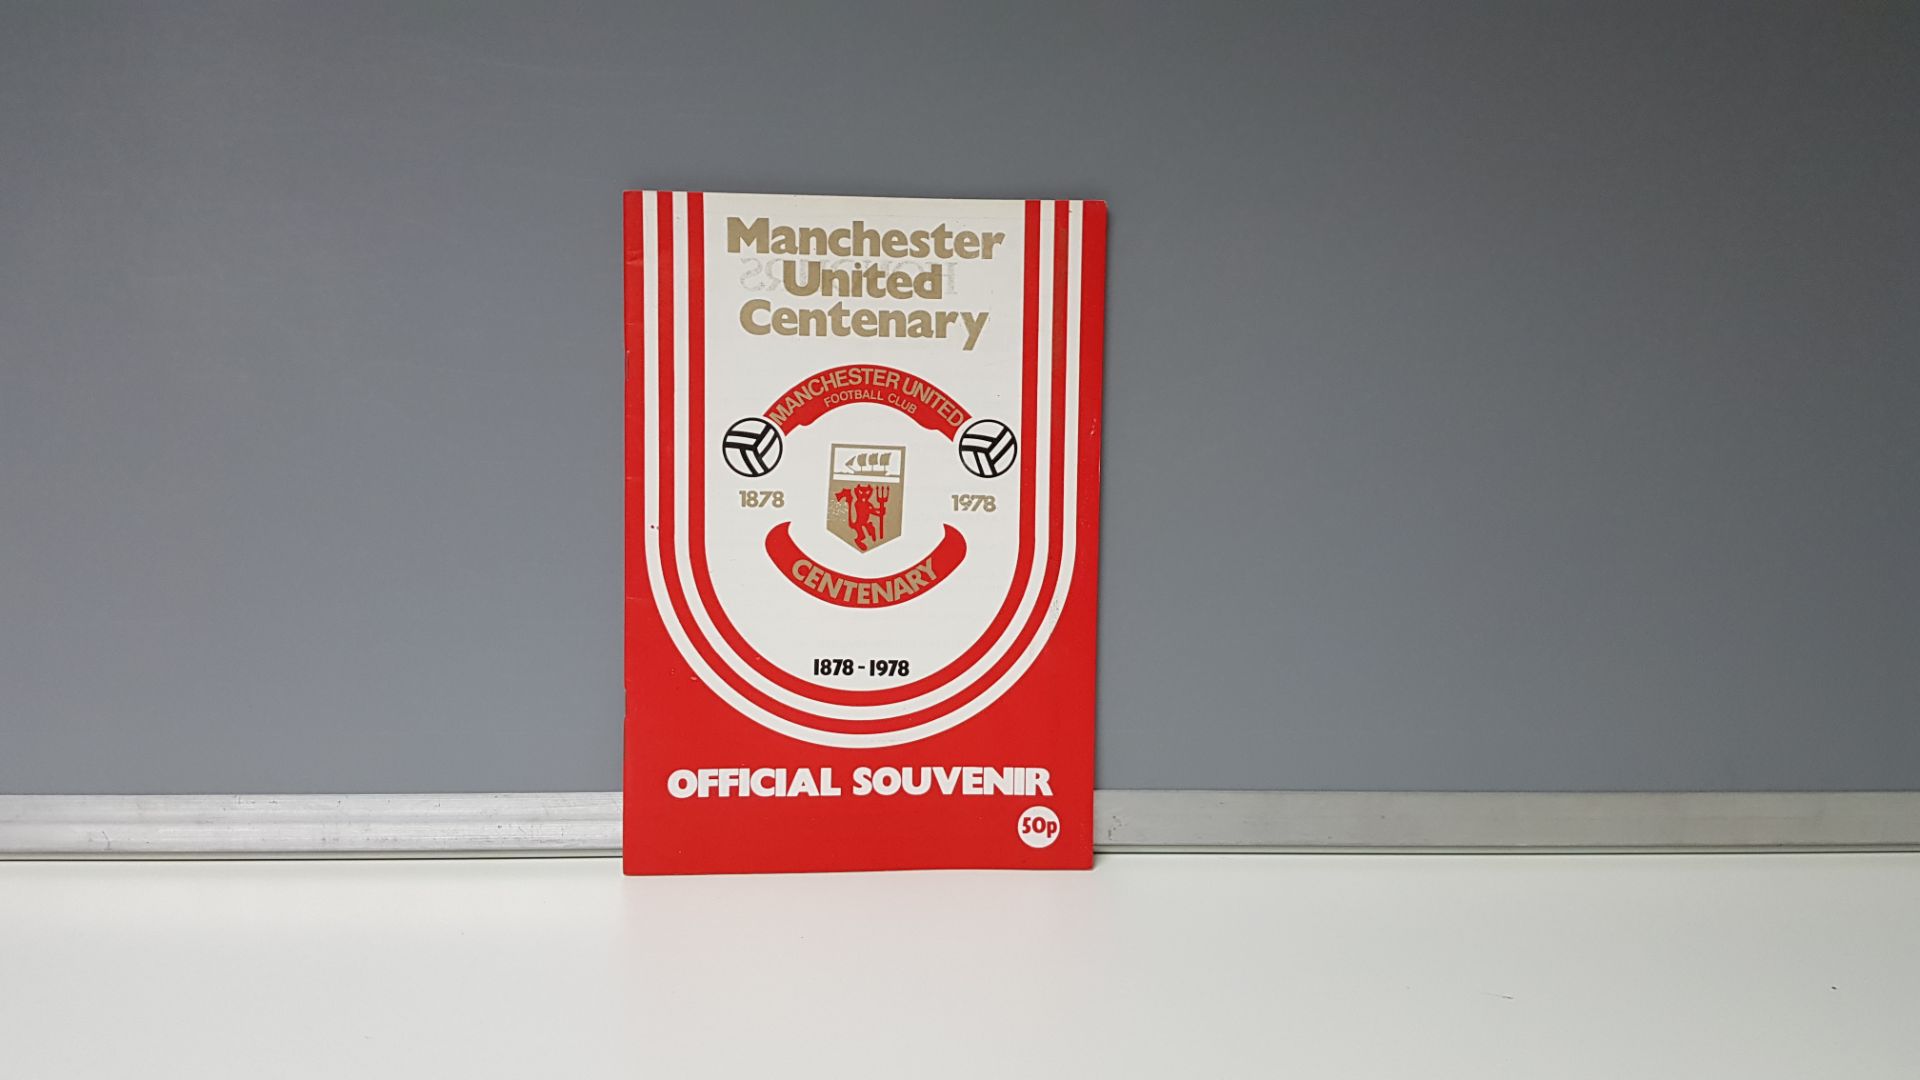 1 X MANCHESTER UNITED CENTENARY 1878-1978 OFFICIAL SOUVENIR PROGRAMME IN NEAR MINT CONDITION